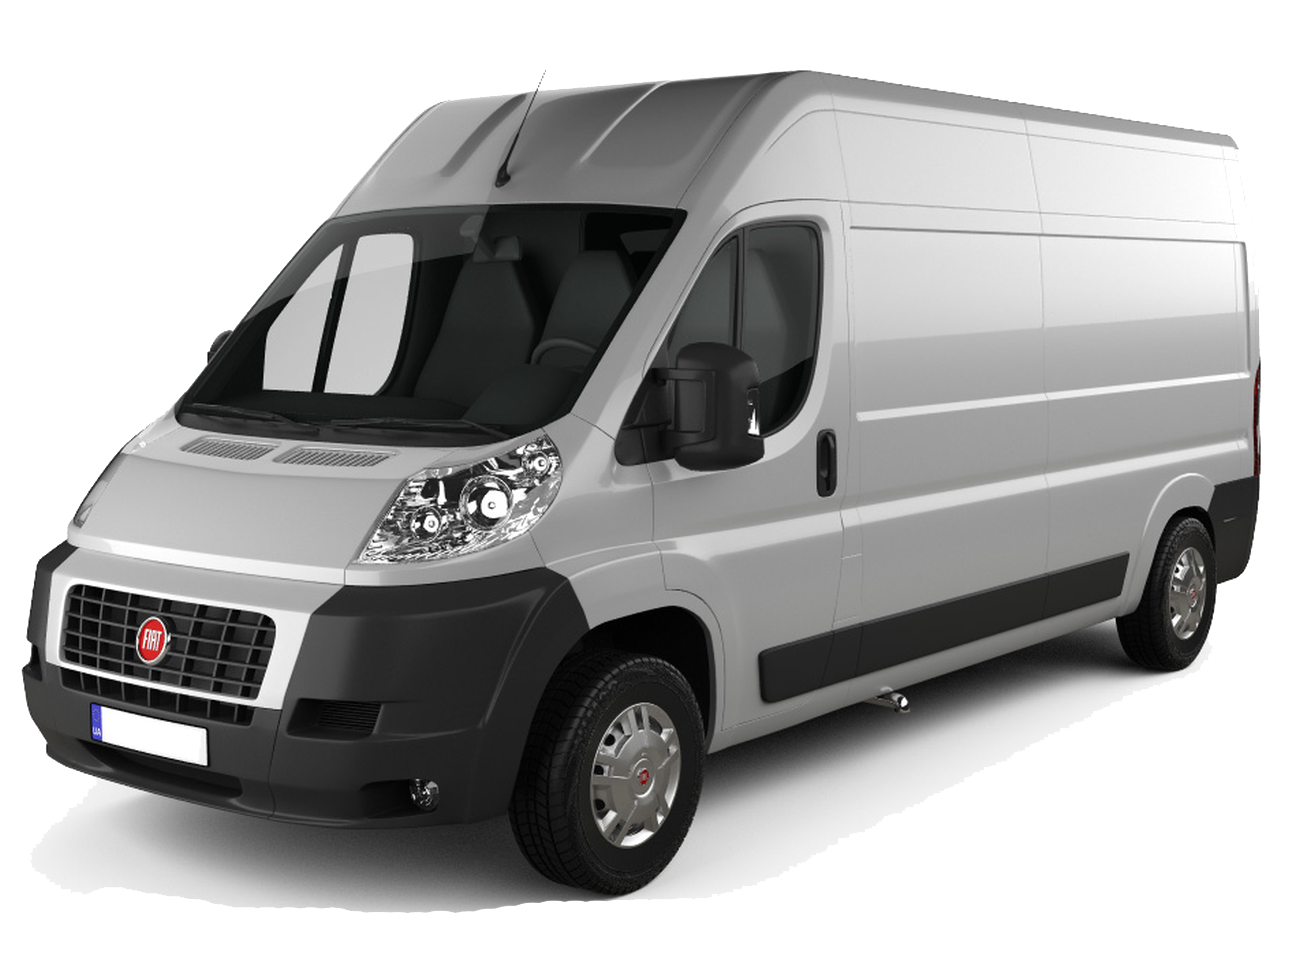 Fiat Ducato 2006 reviews, technical data, prices